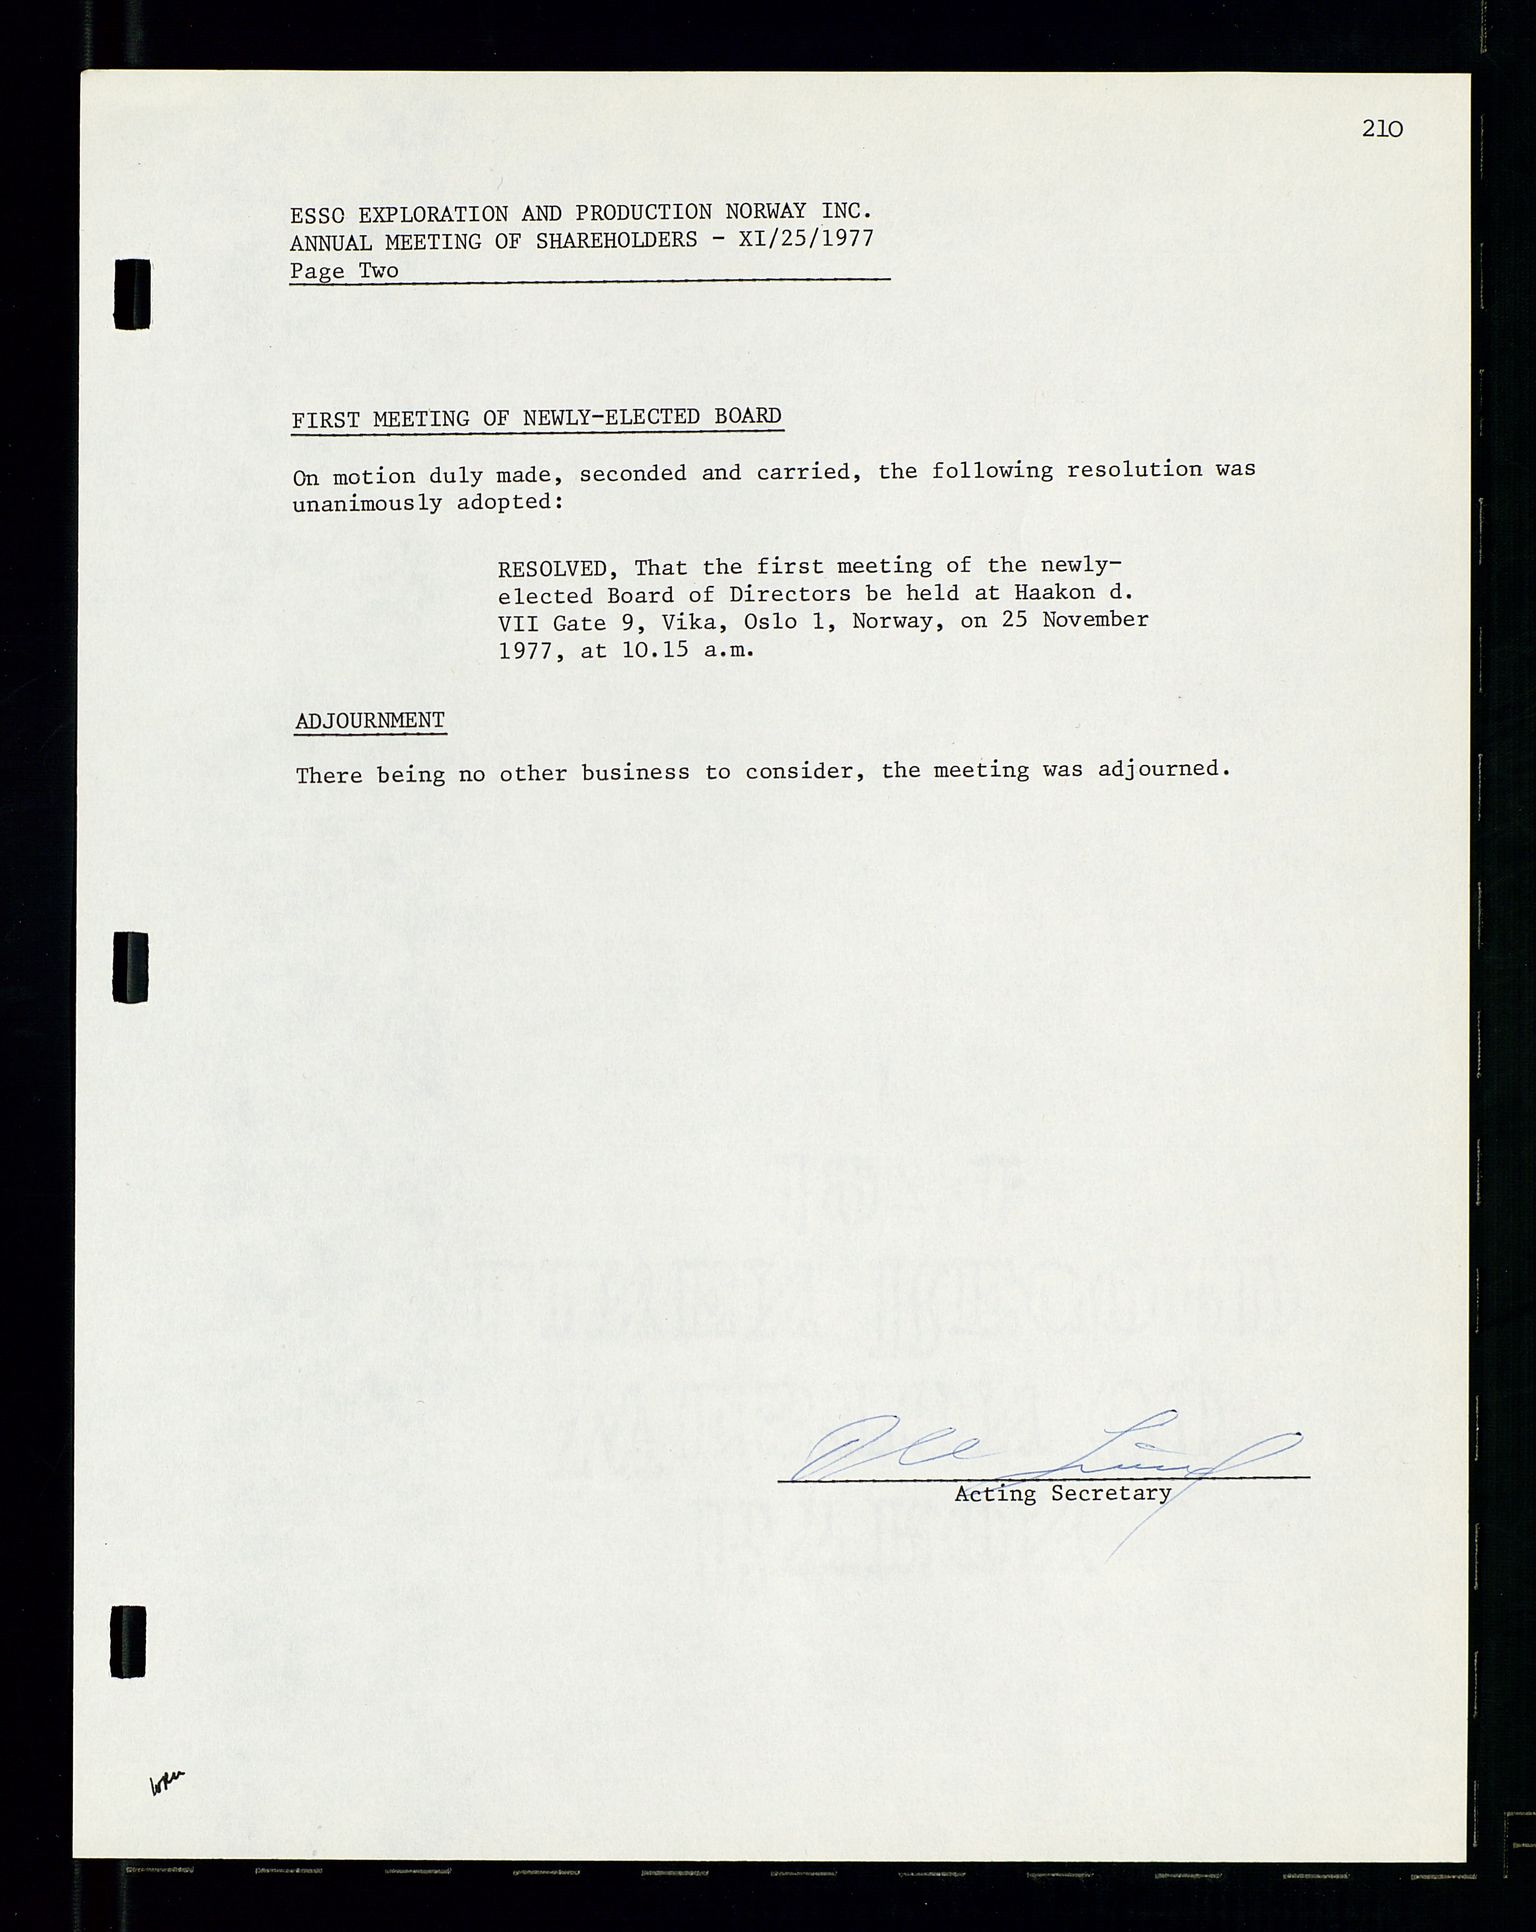 Pa 1512 - Esso Exploration and Production Norway Inc., SAST/A-101917/A/Aa/L0001/0002: Styredokumenter / Corporate records, Board meeting minutes, Agreements, Stocholder meetings, 1975-1979, s. 65